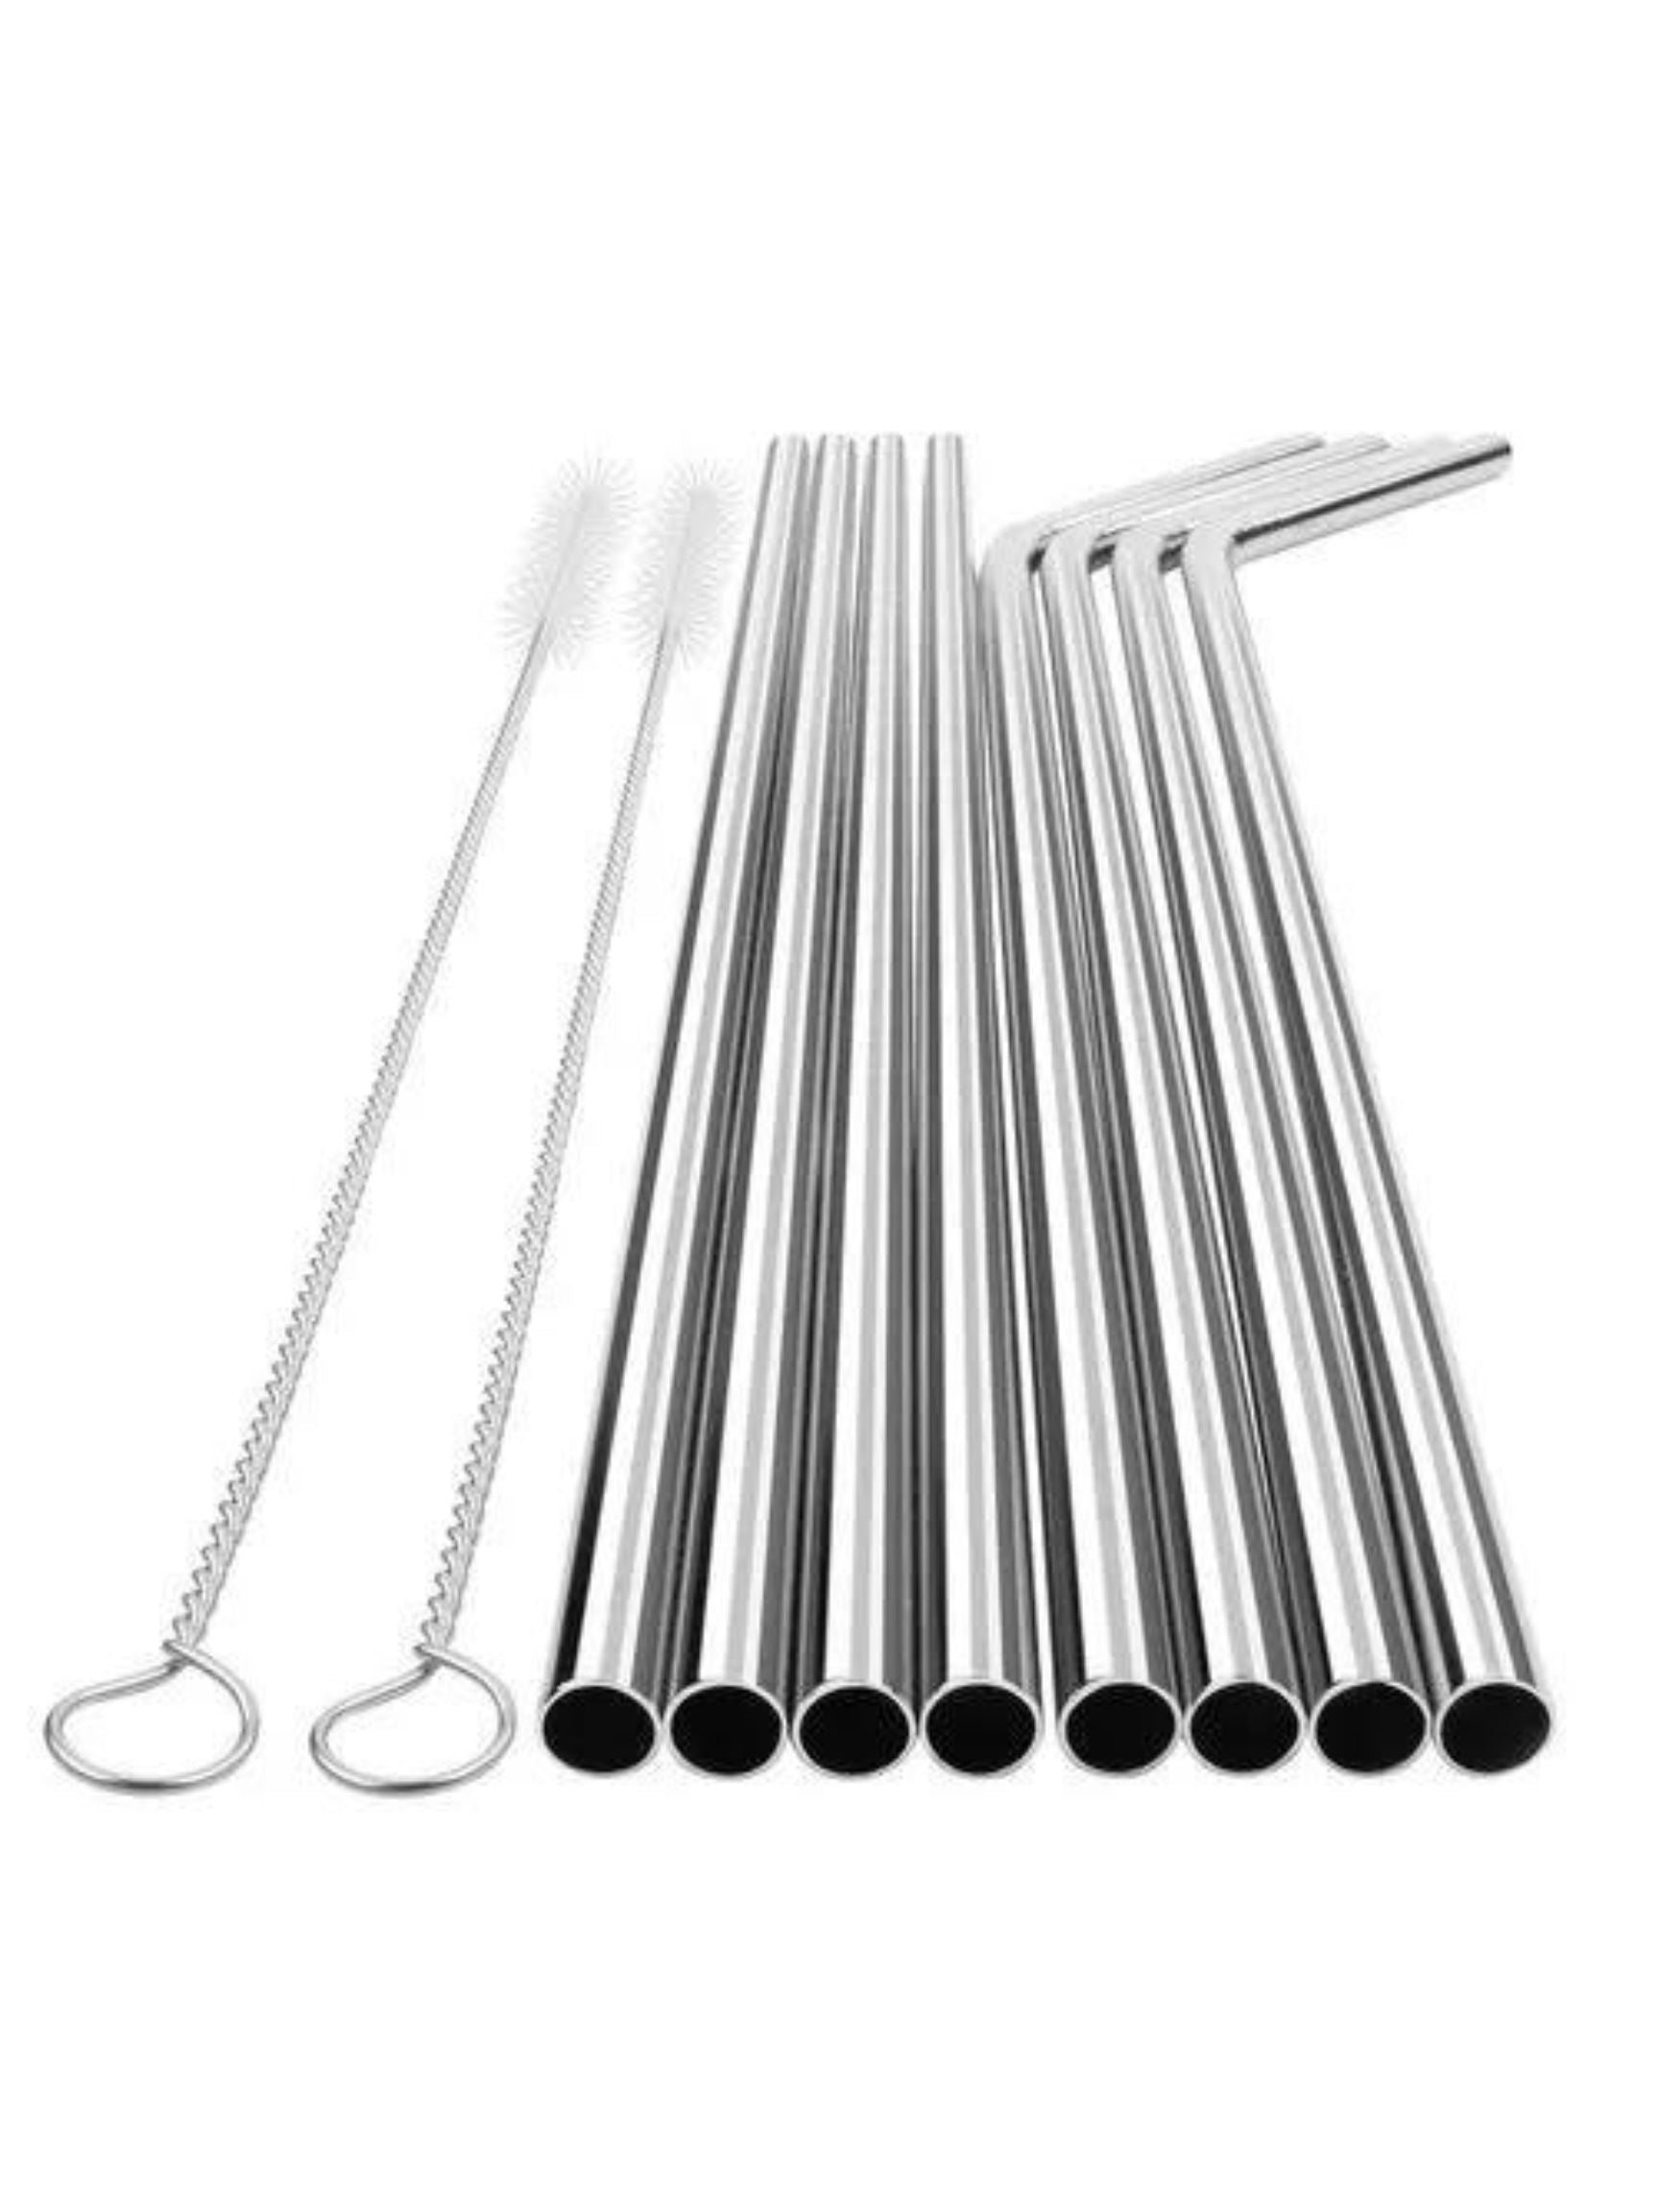 ZogeeZ 20 piece Stainless Steel Straws 10.5" Reusable Drinking Straws & Cleaning Brushes Set